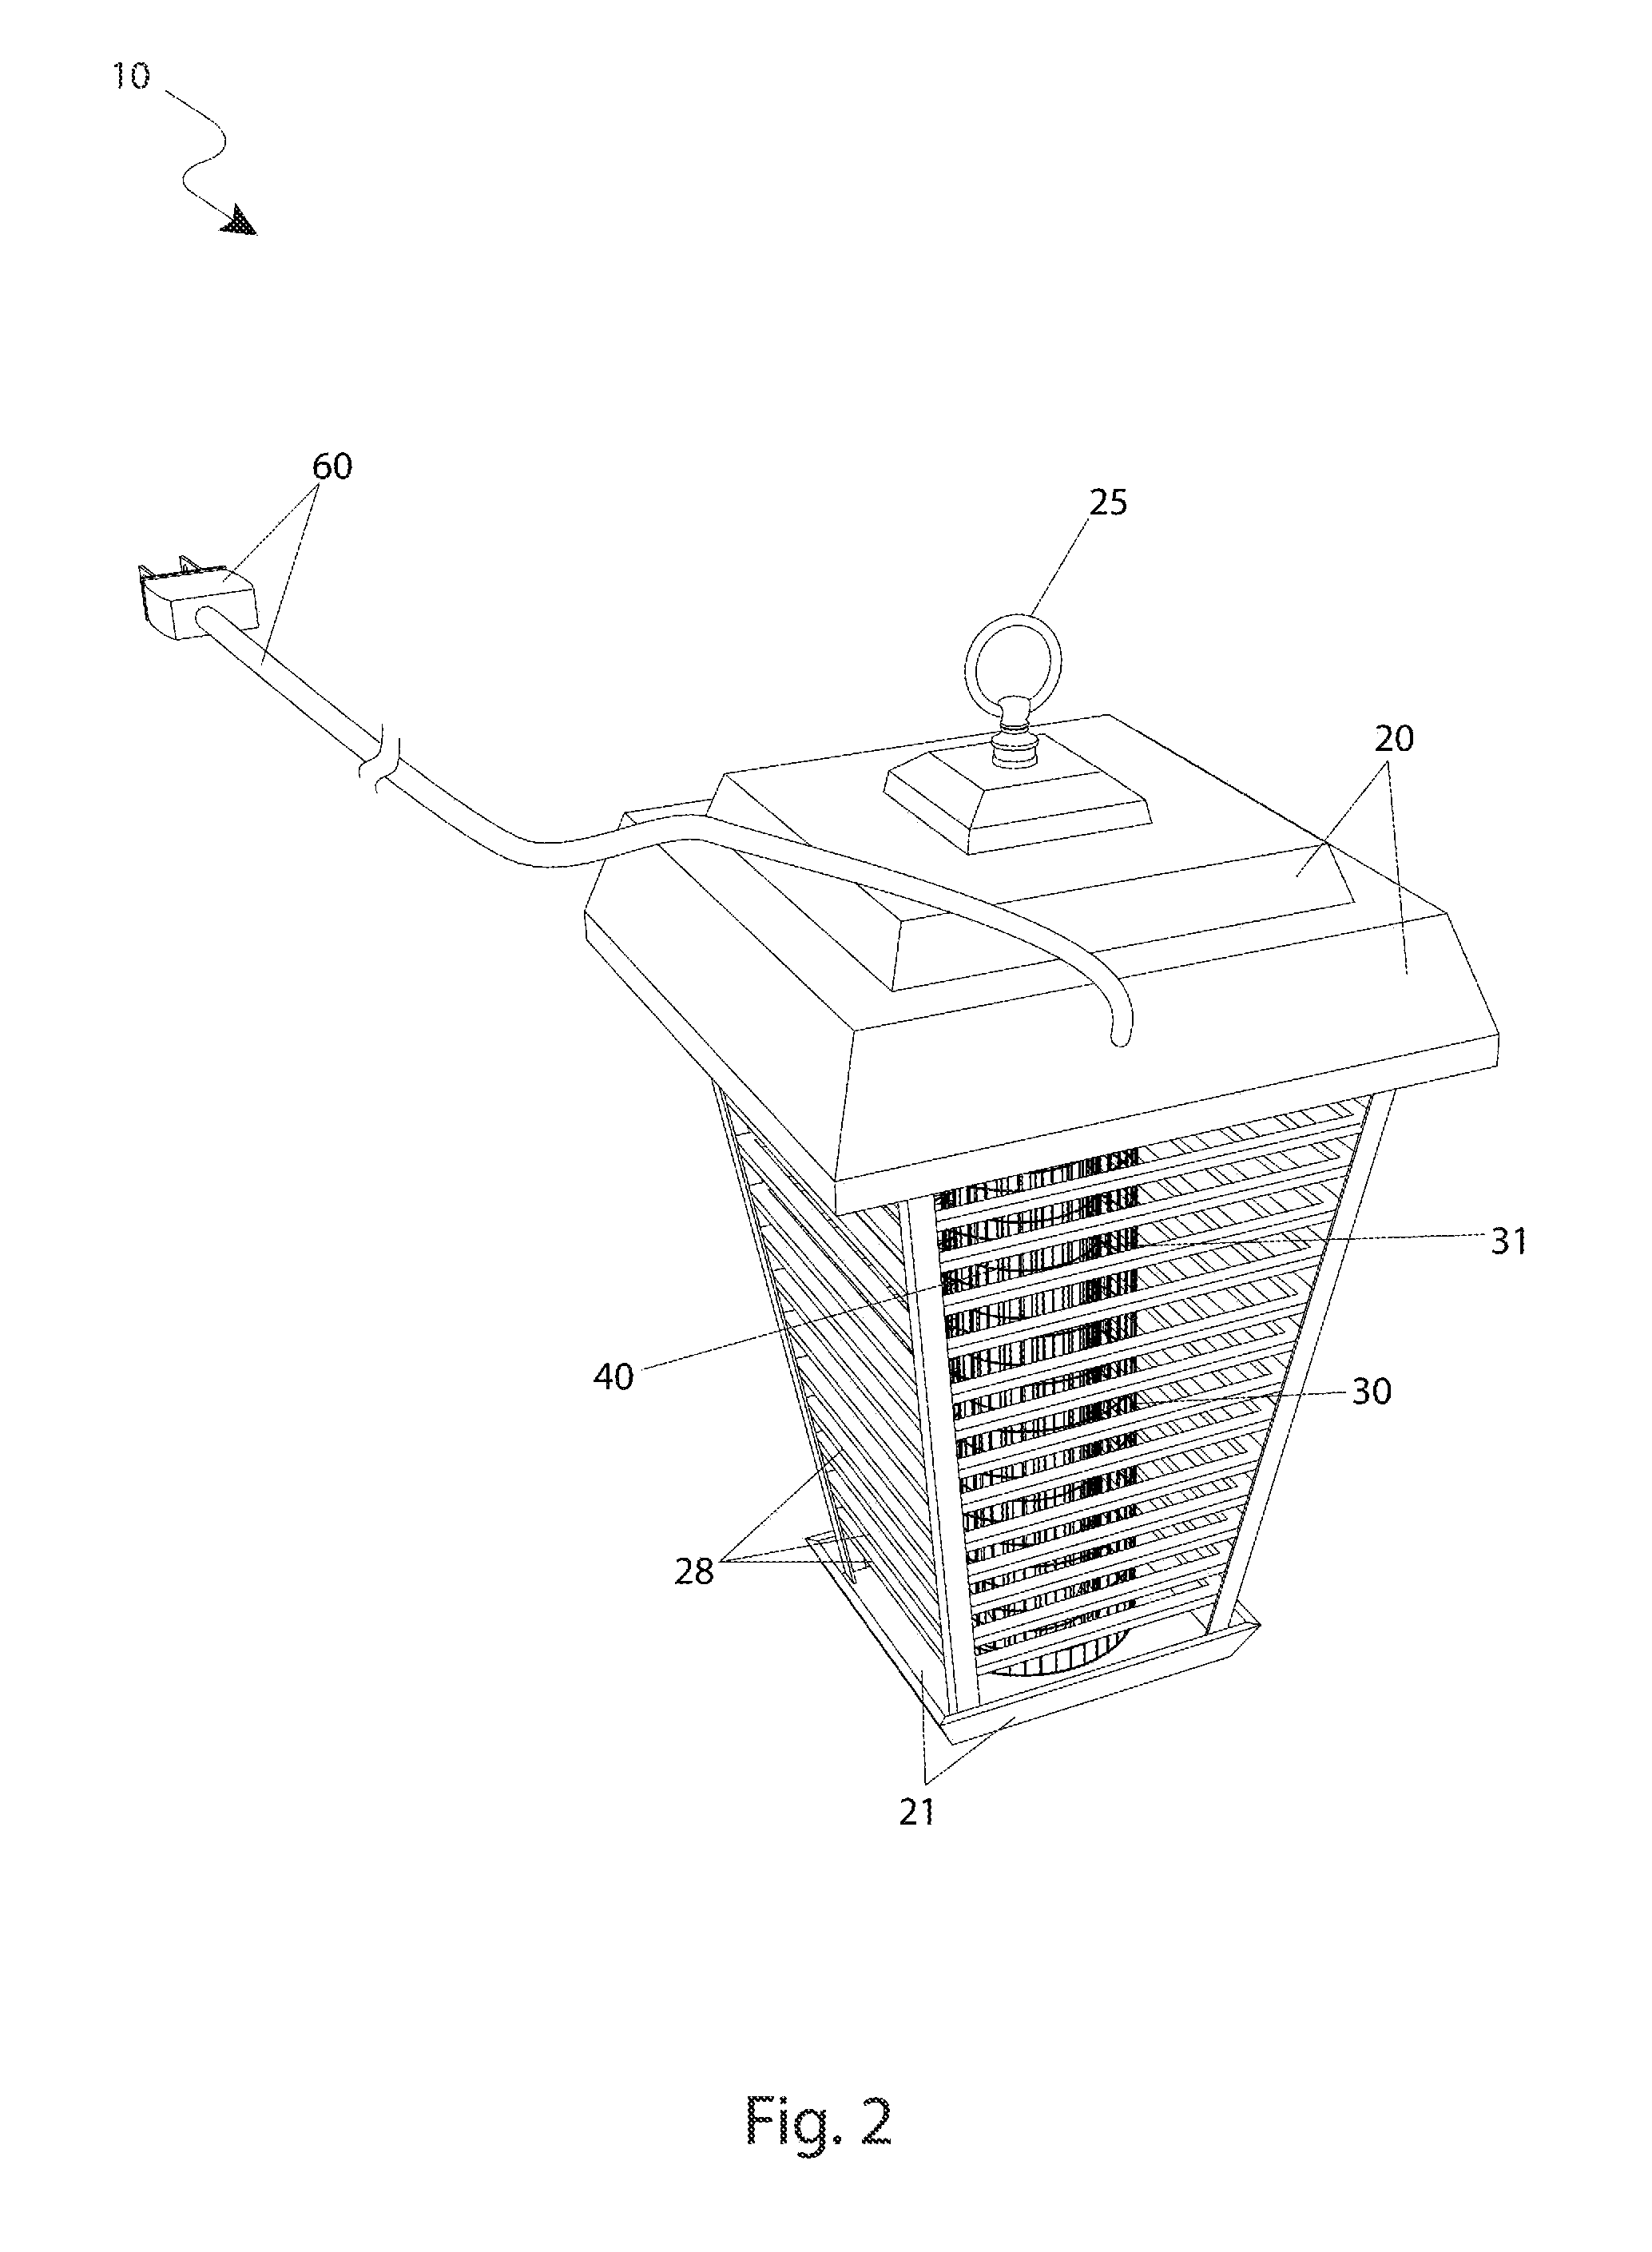 Insect electrocution device with counter